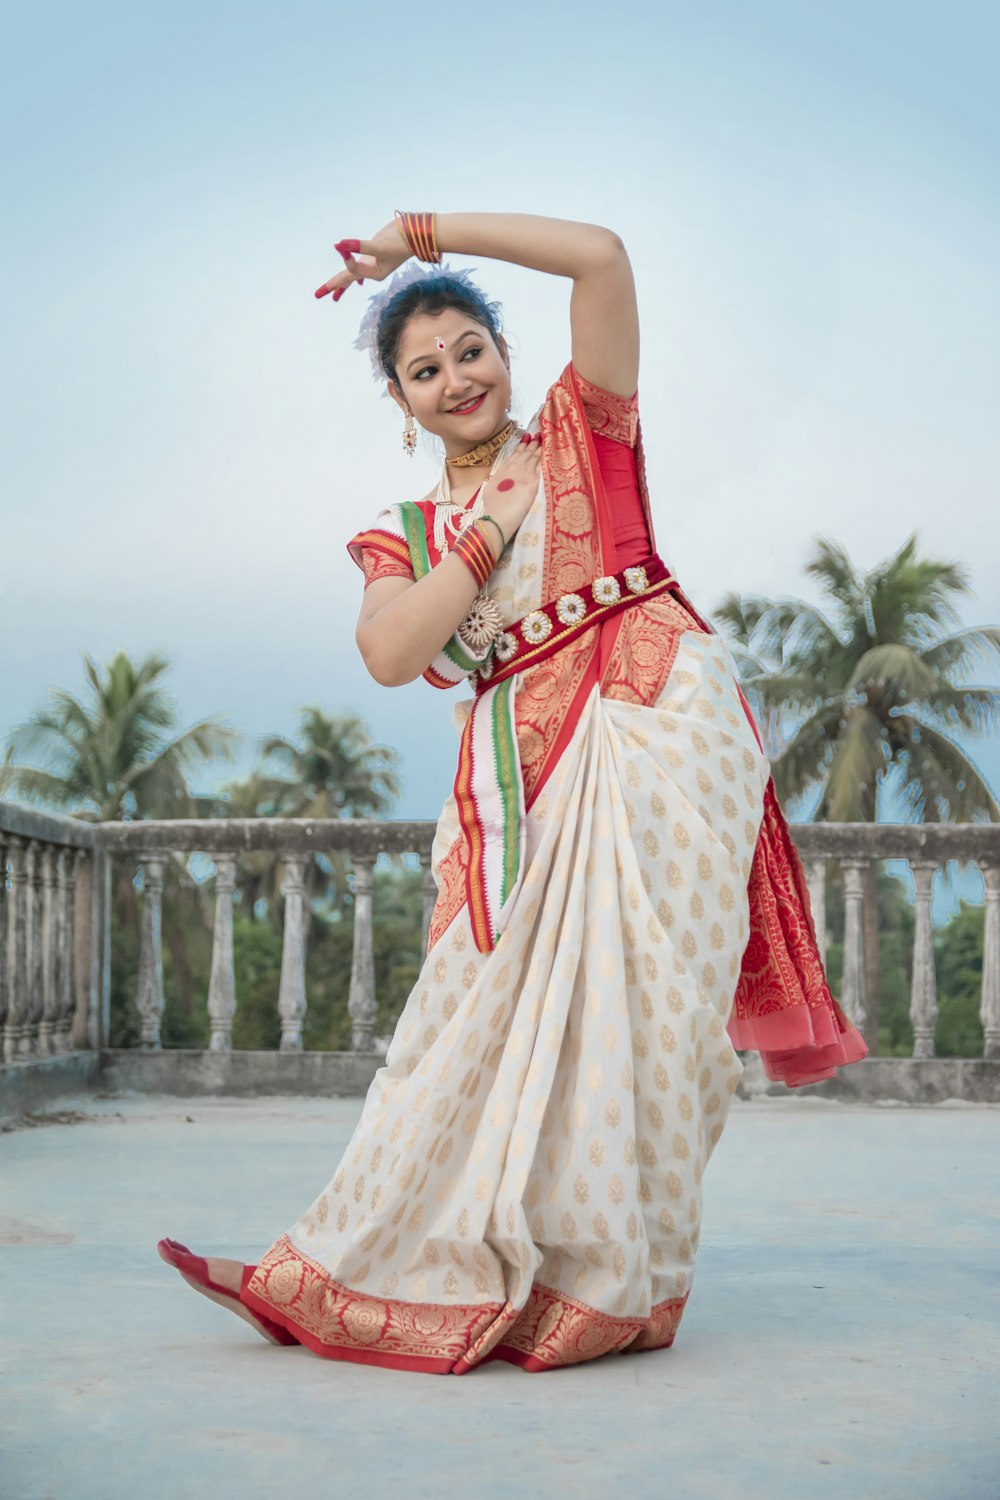 woman in red and white sari standing on gray concrete floor during daytime